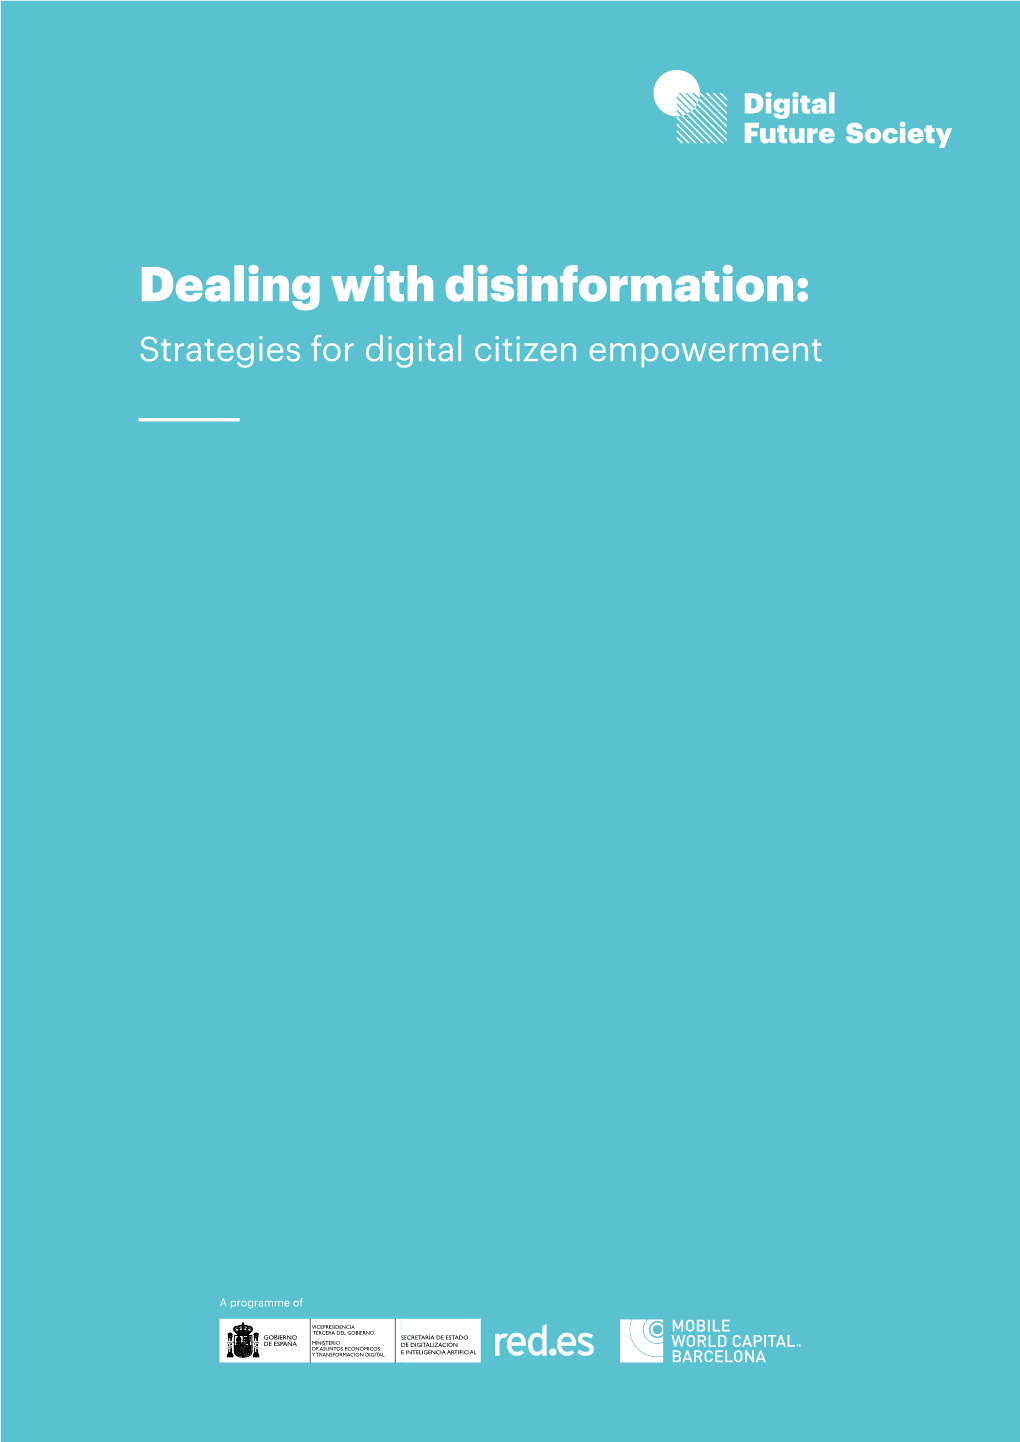 Dealing with Disinformation: Strategies for Digital Citizen Empowerment About Digital Future Society